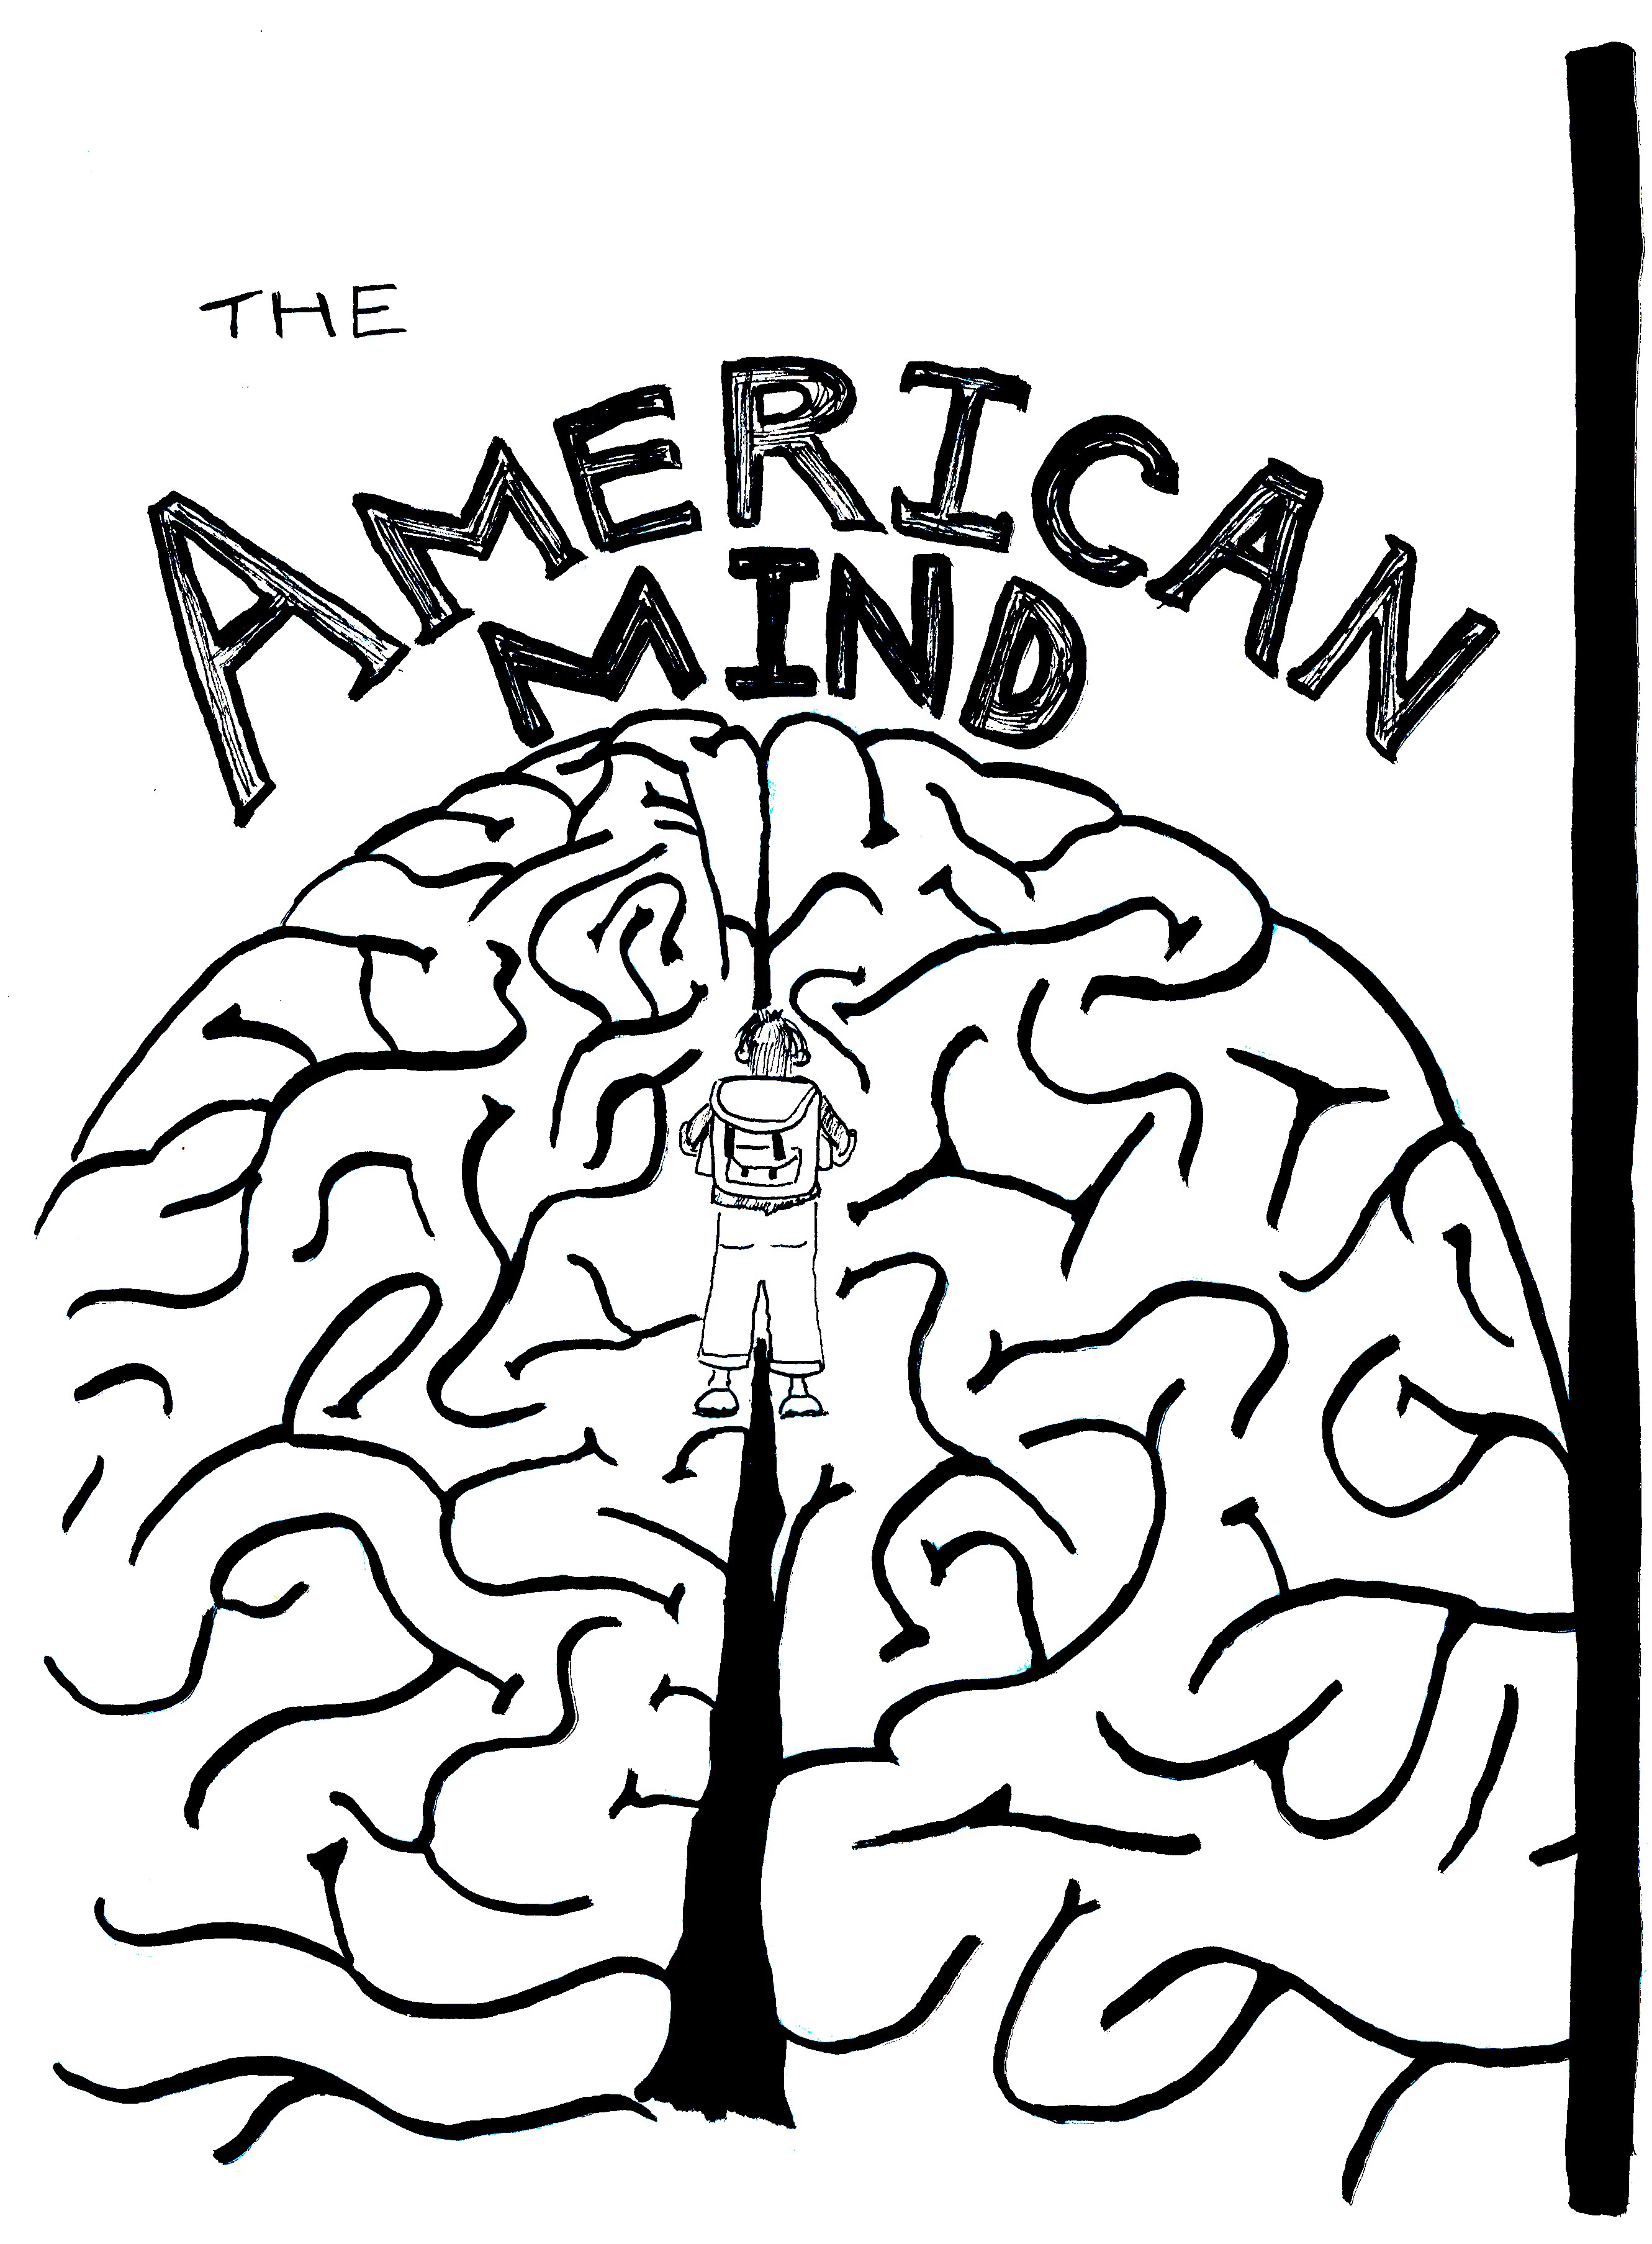 This story is about standing on a brain. The middle part of a brain.